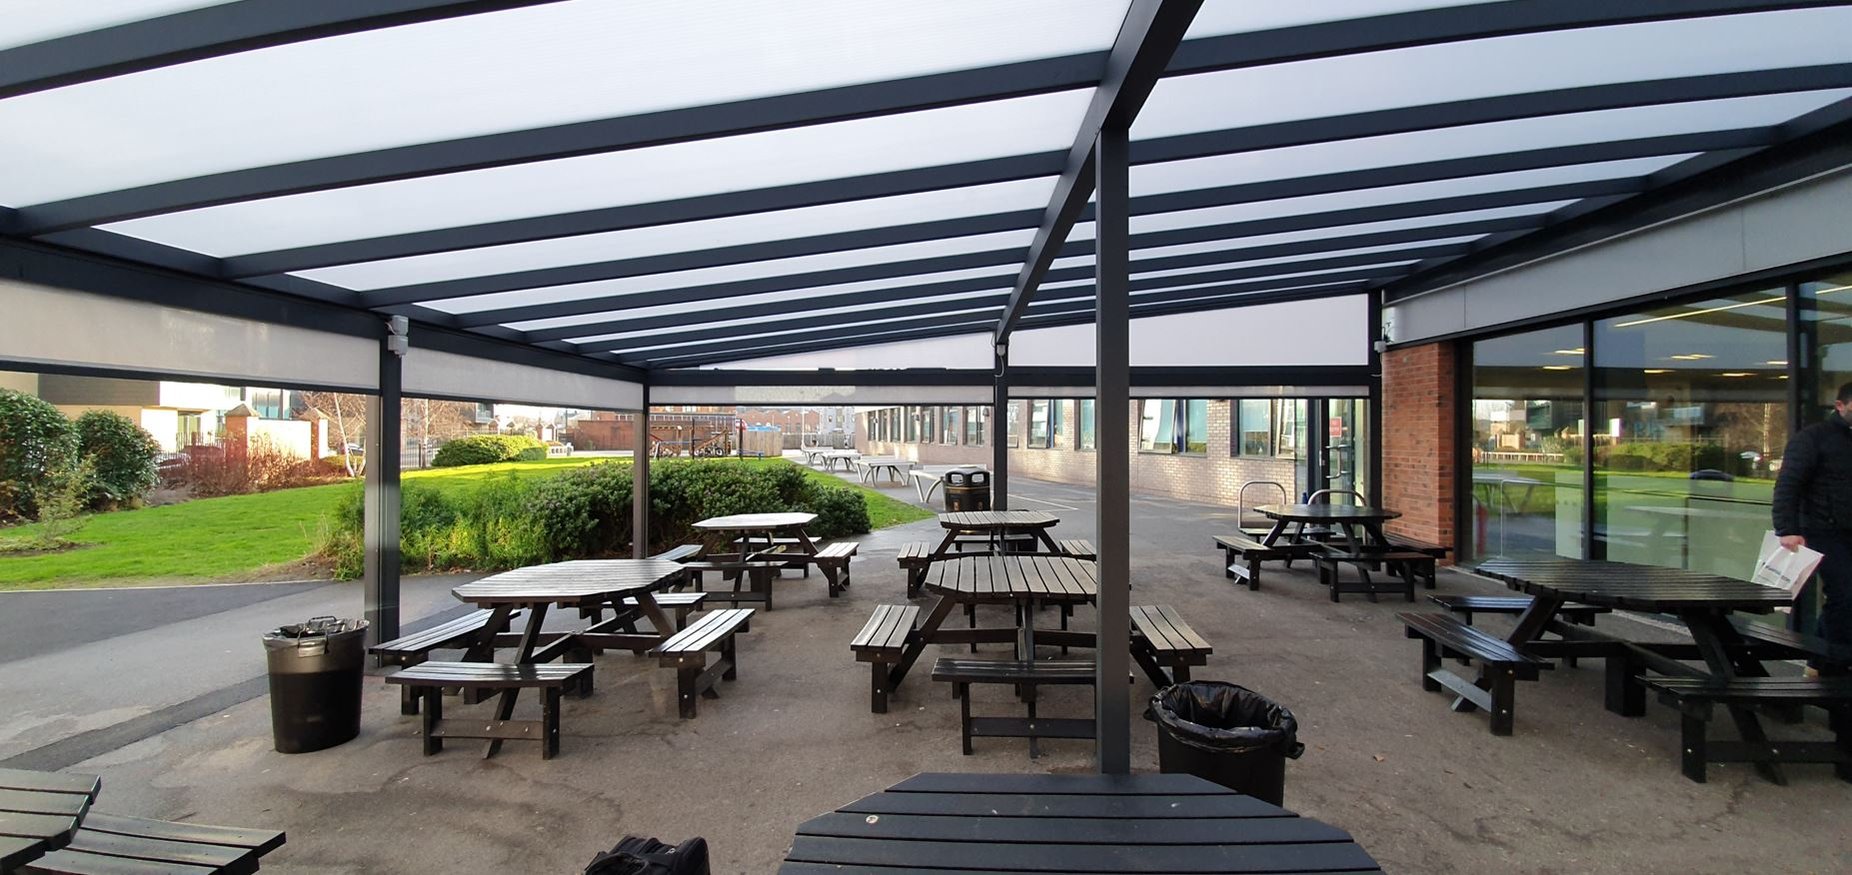 Large dining area canopy with external blinds